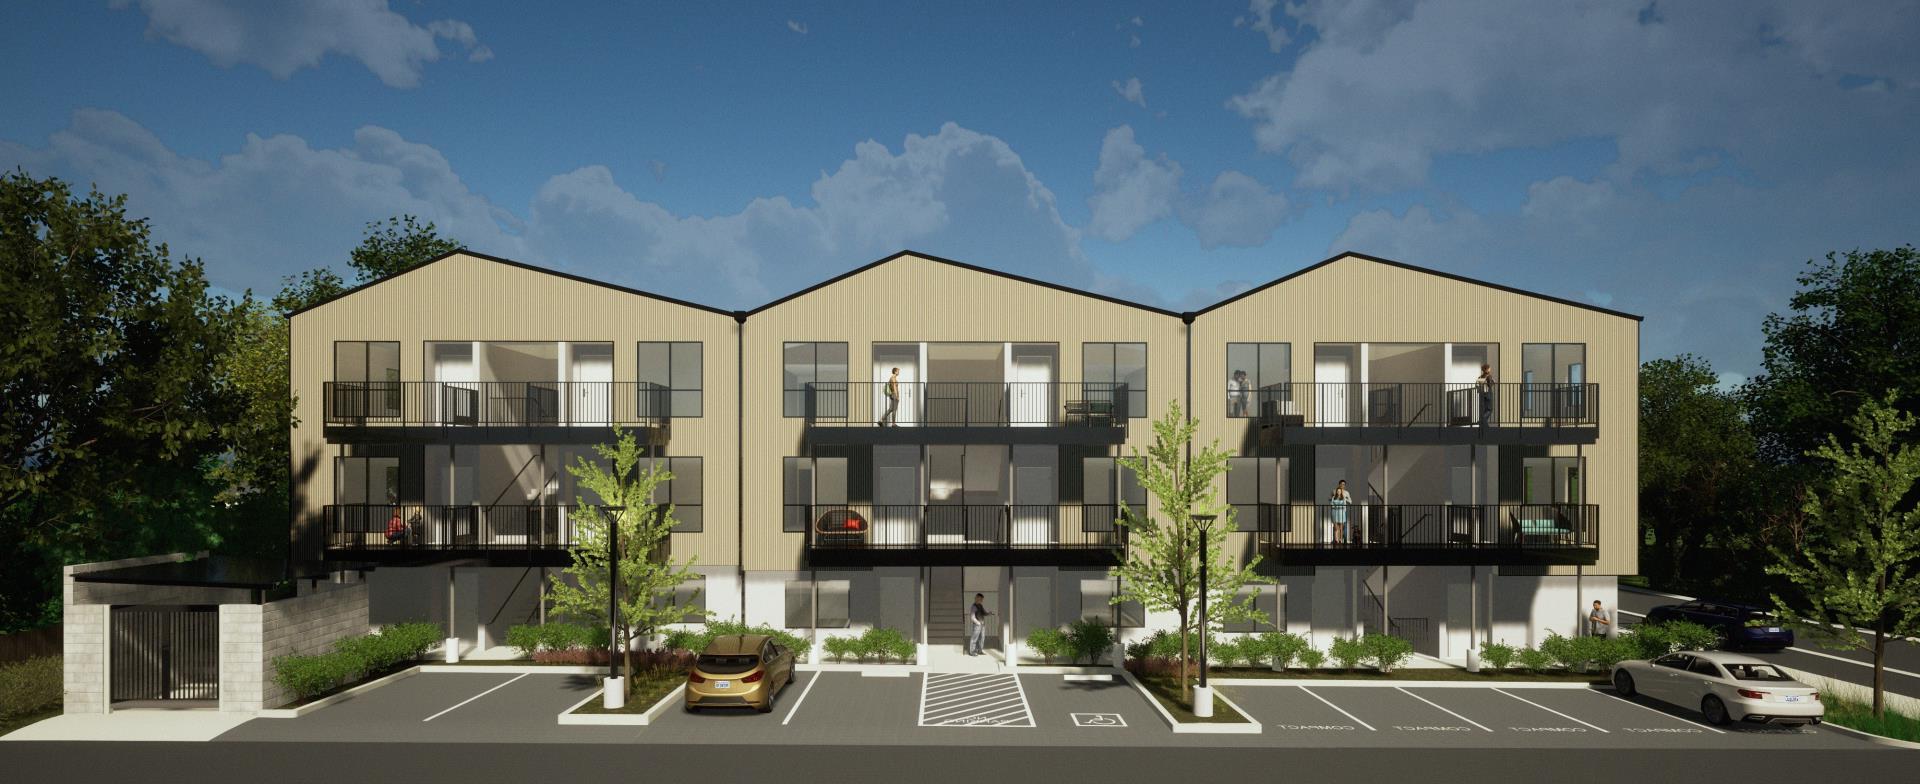 Huddle on 5th street apartments rendering